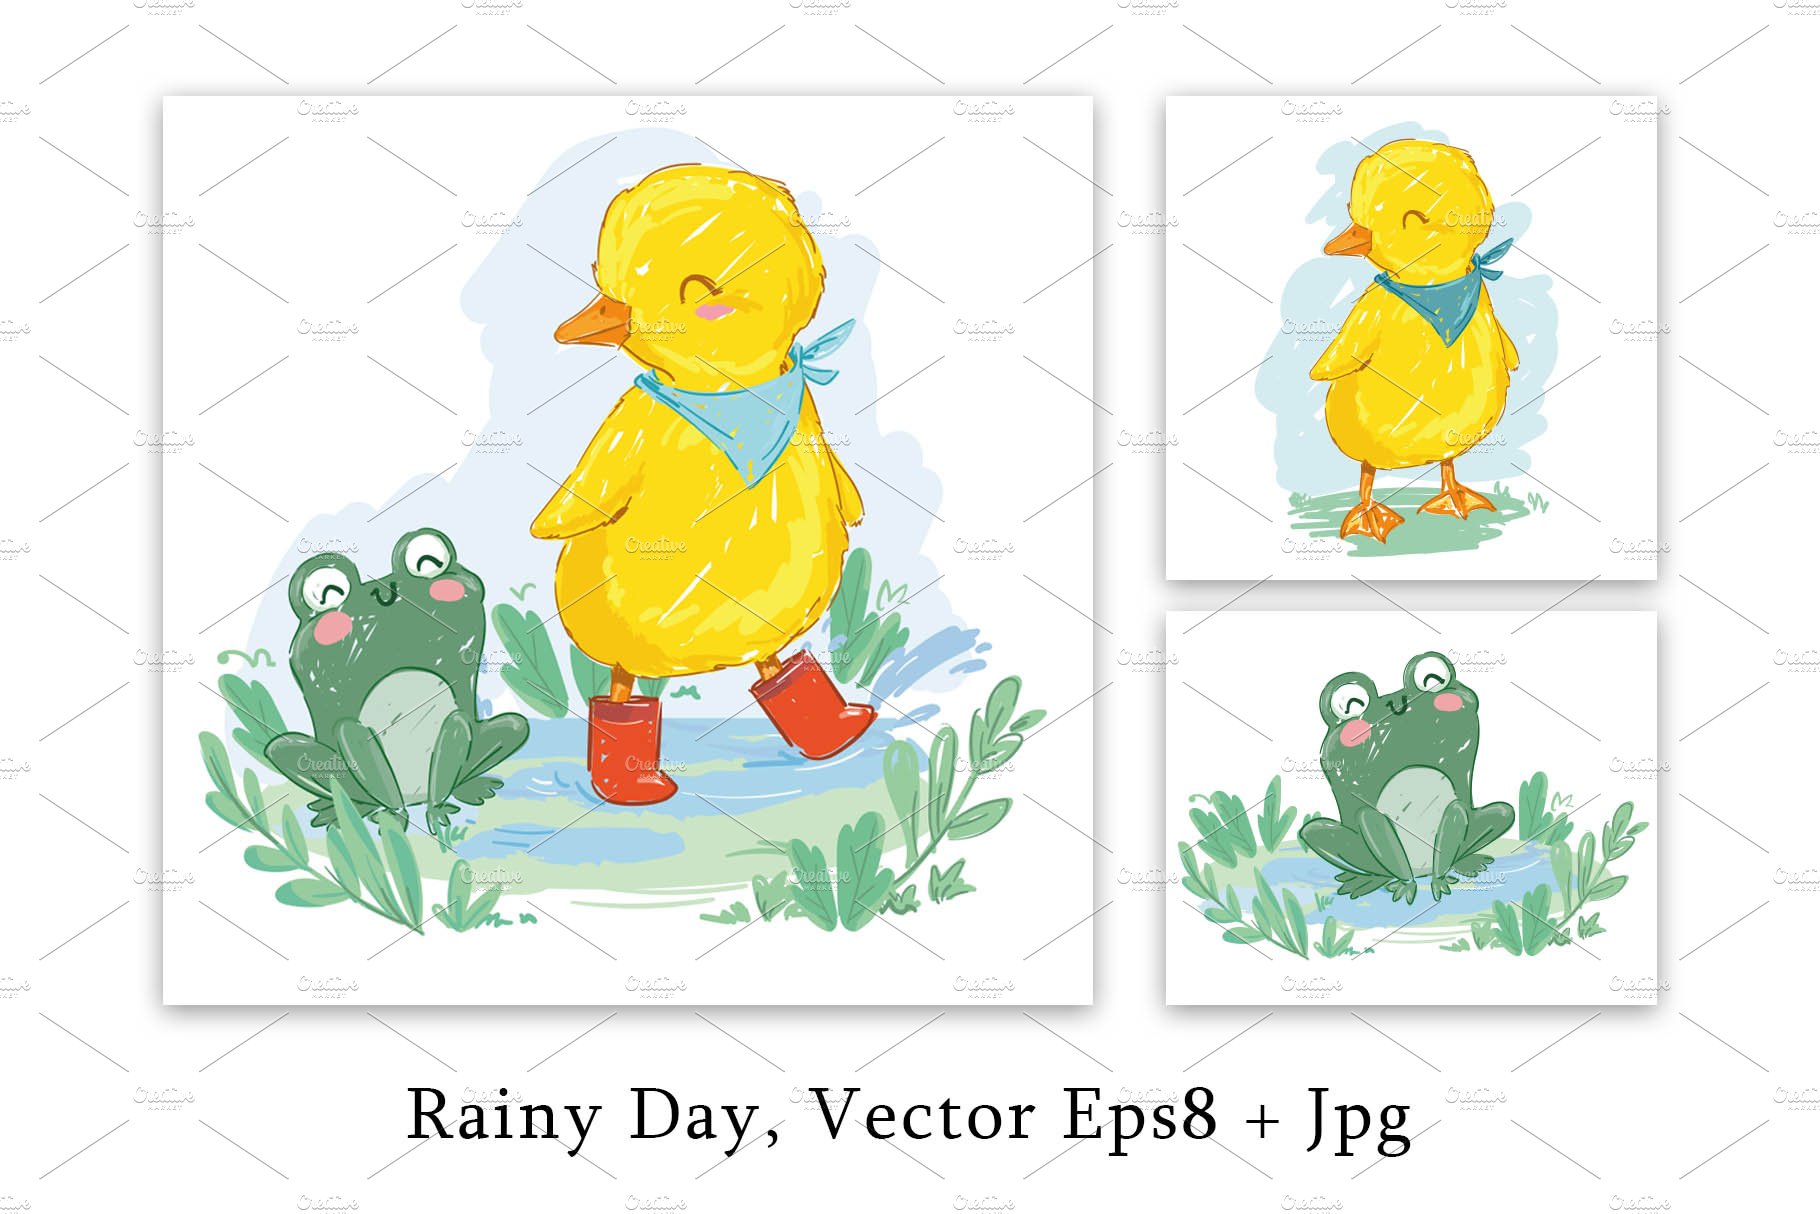 Cute duckling and frog, rainy day cover image.